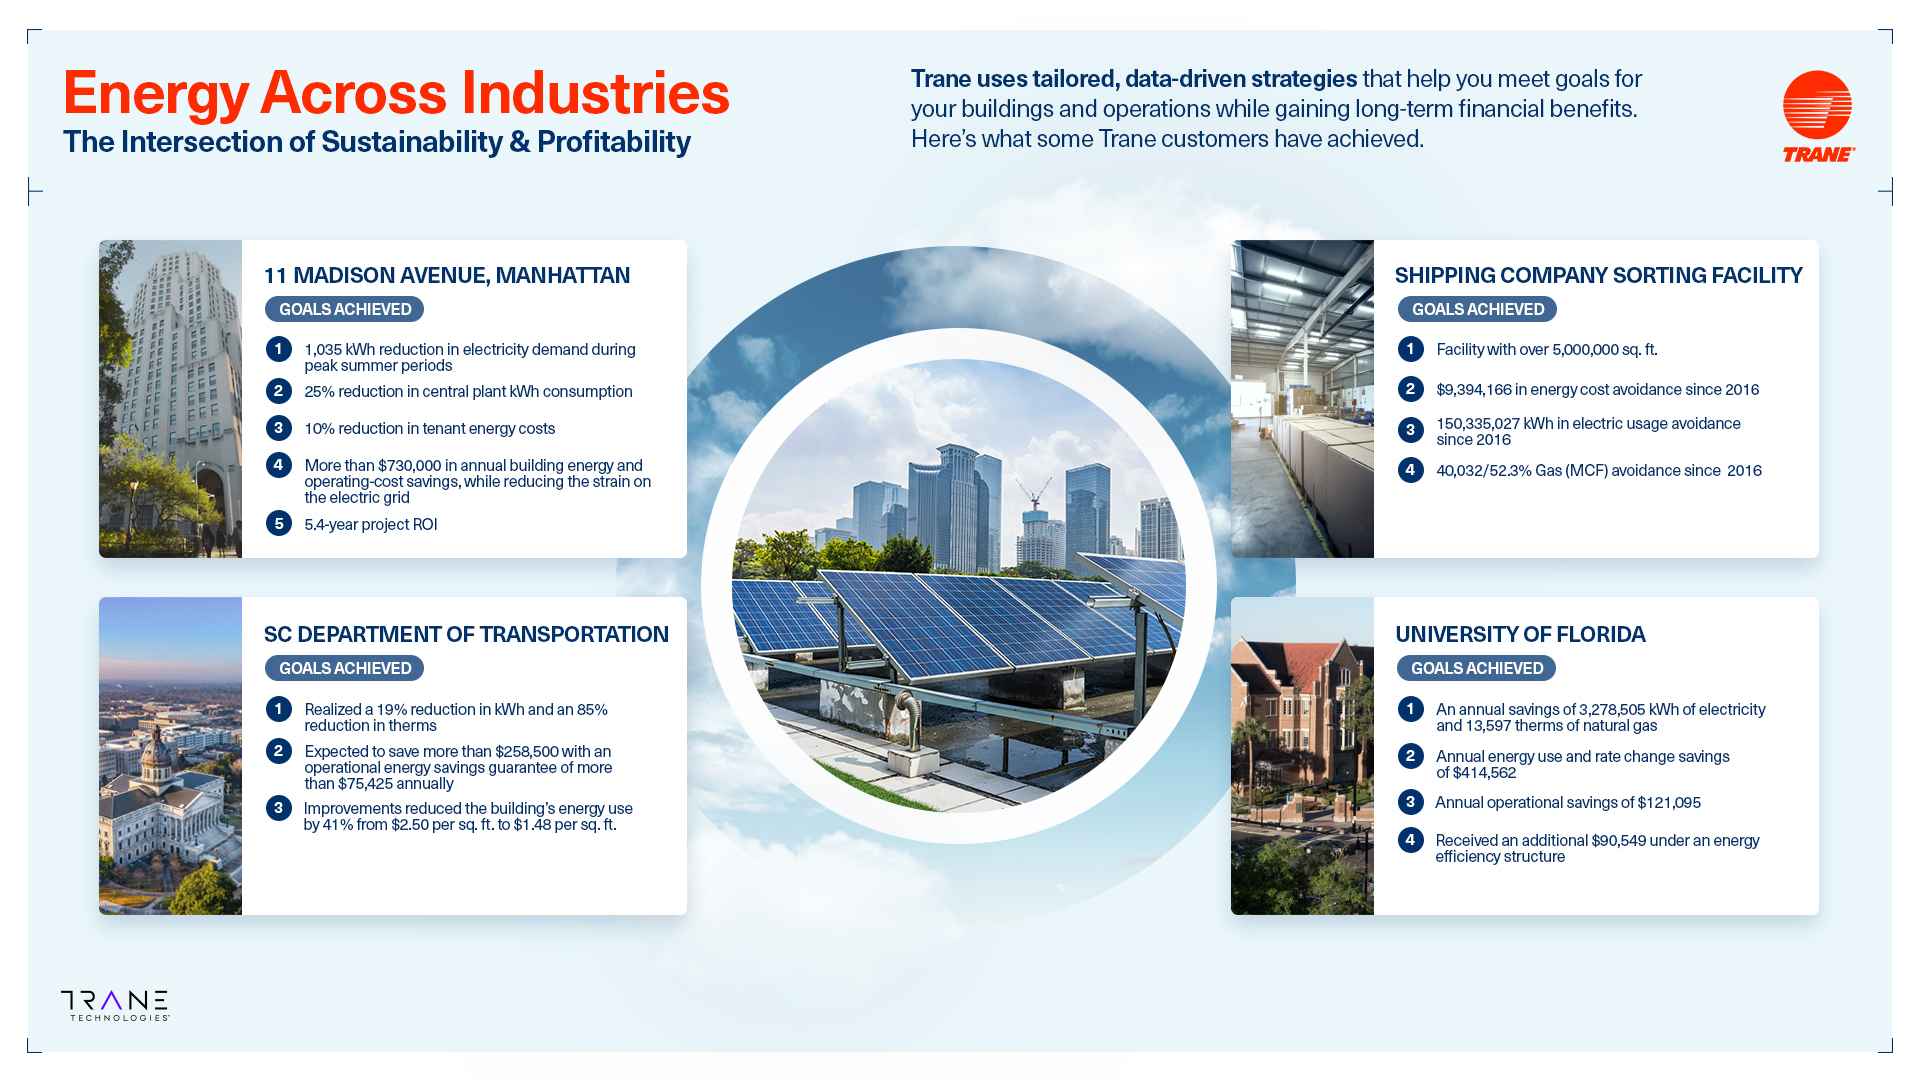 tc-Energy-Services-Infographic-v3-small.jpg